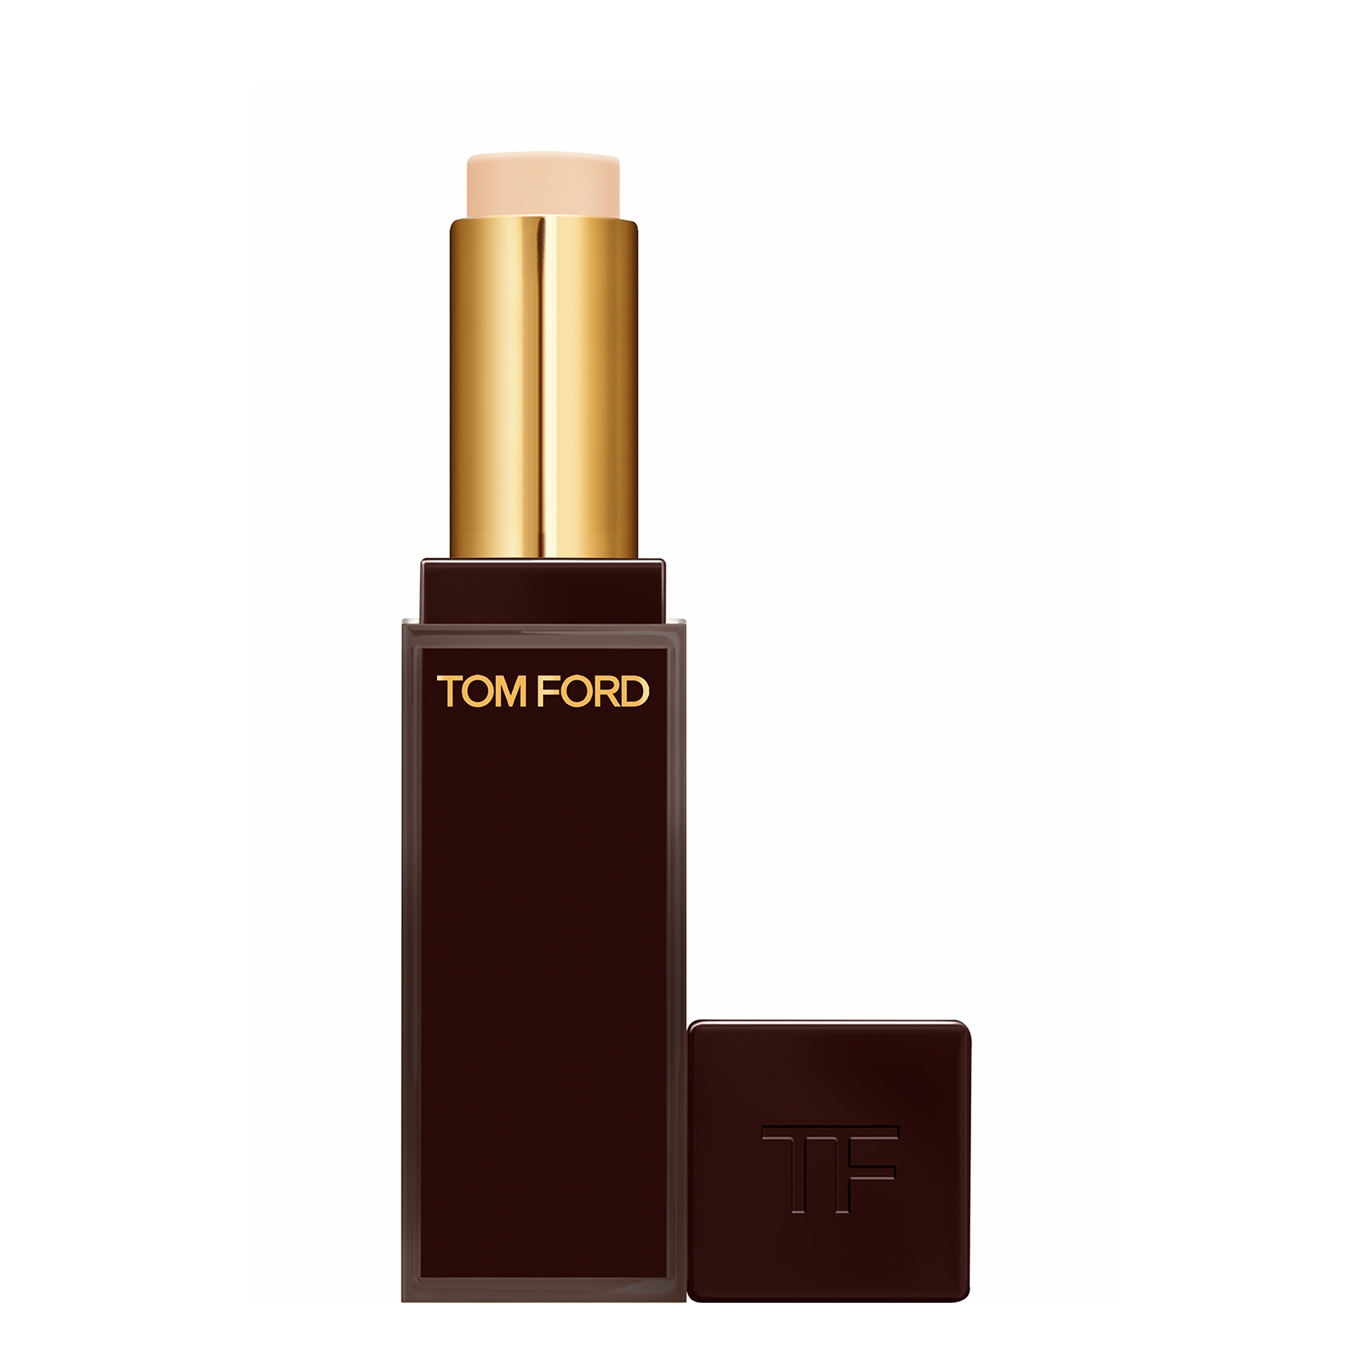 Tom Ford Traceless Soft Matte Concealer - Colour 0w0 Shell